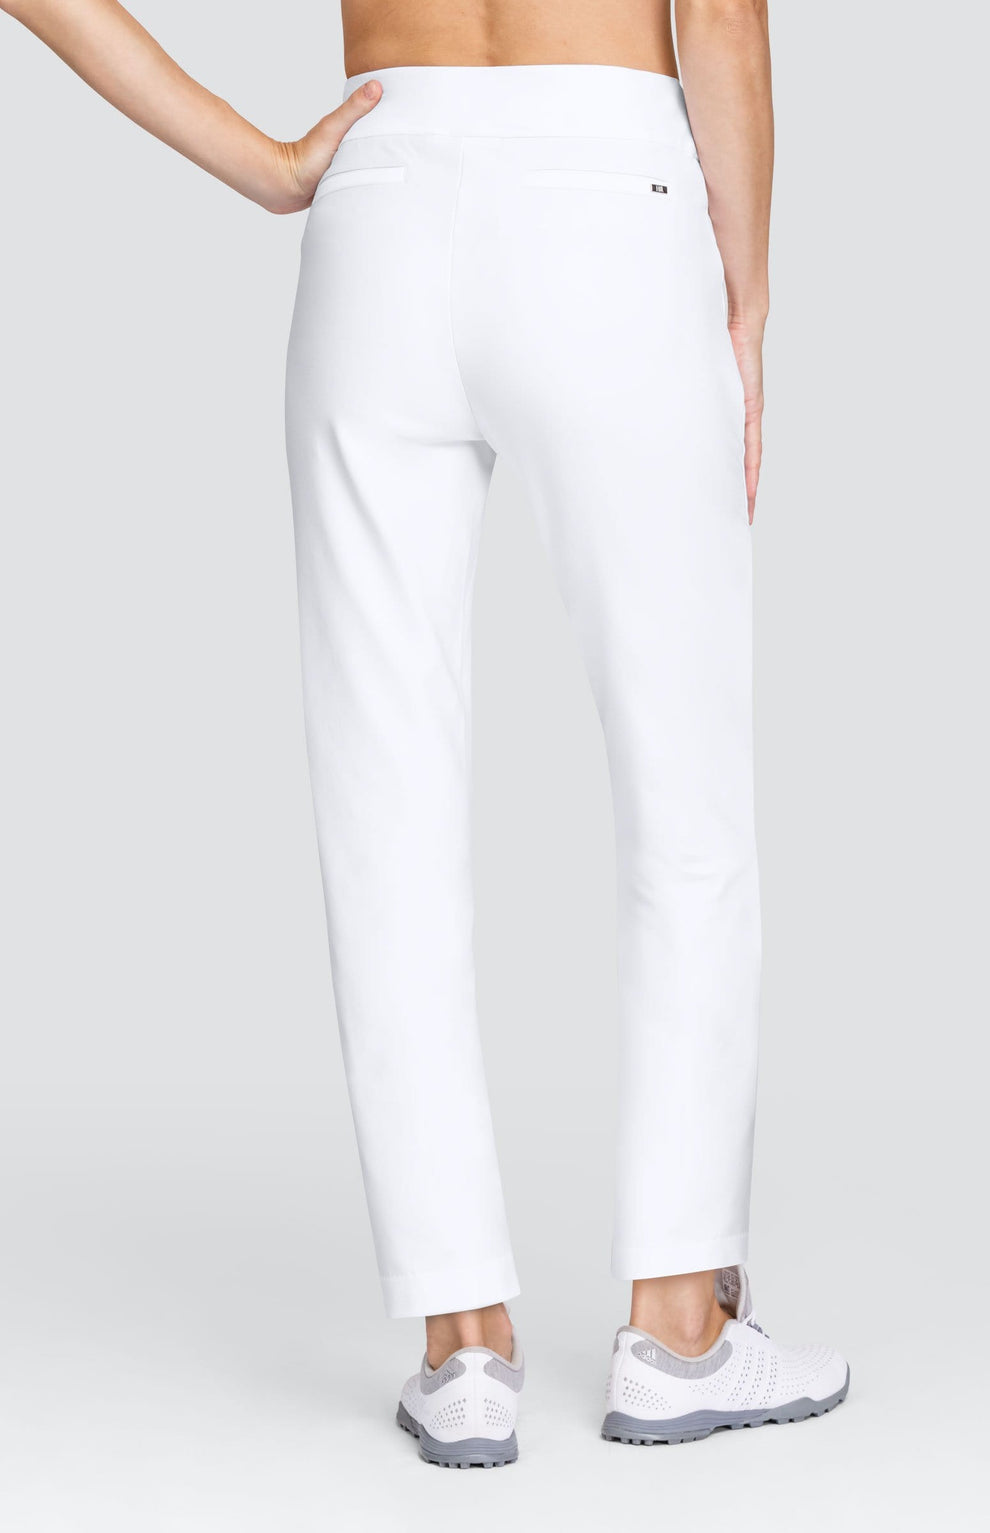 Allure 28 Ankle Pant - Chalk White